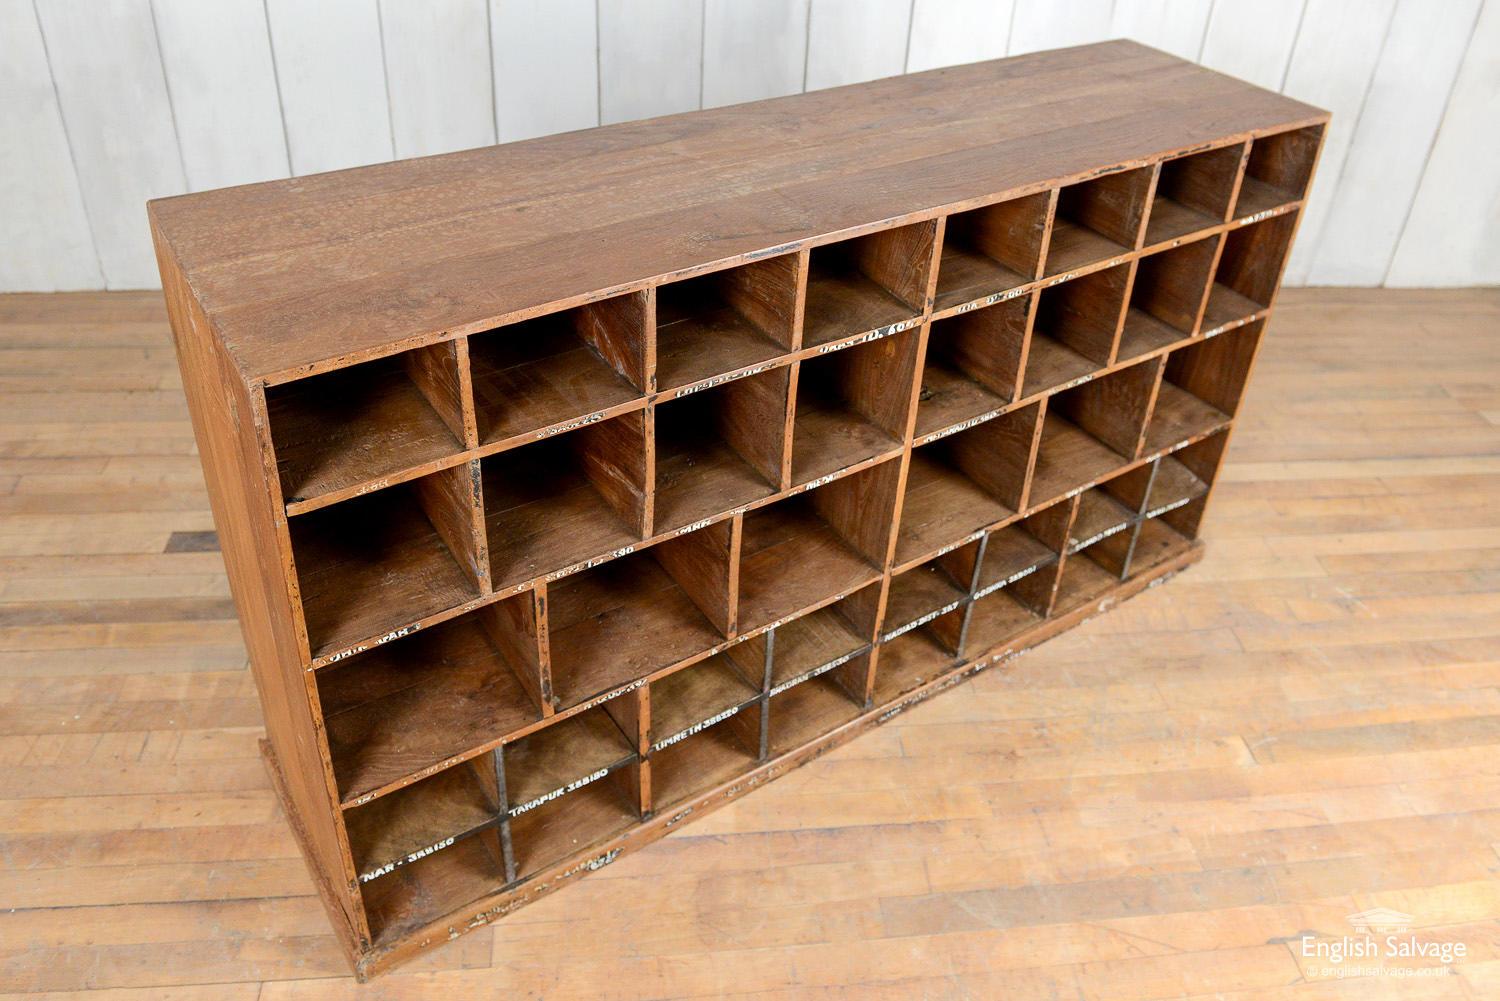 wooden pigeon hole shelving